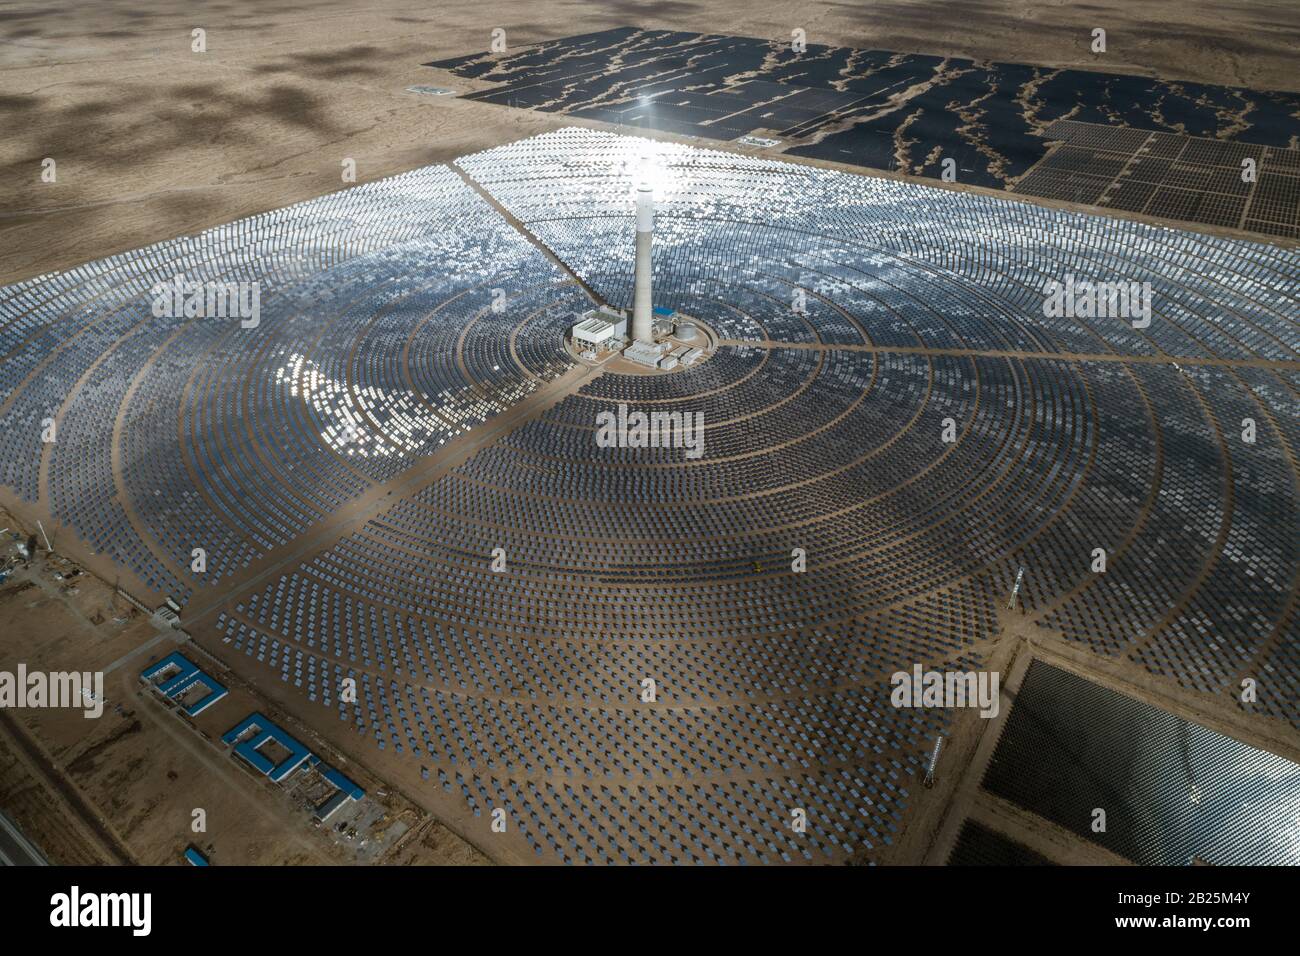 Aerial view of solar thermal plant Stock Photo